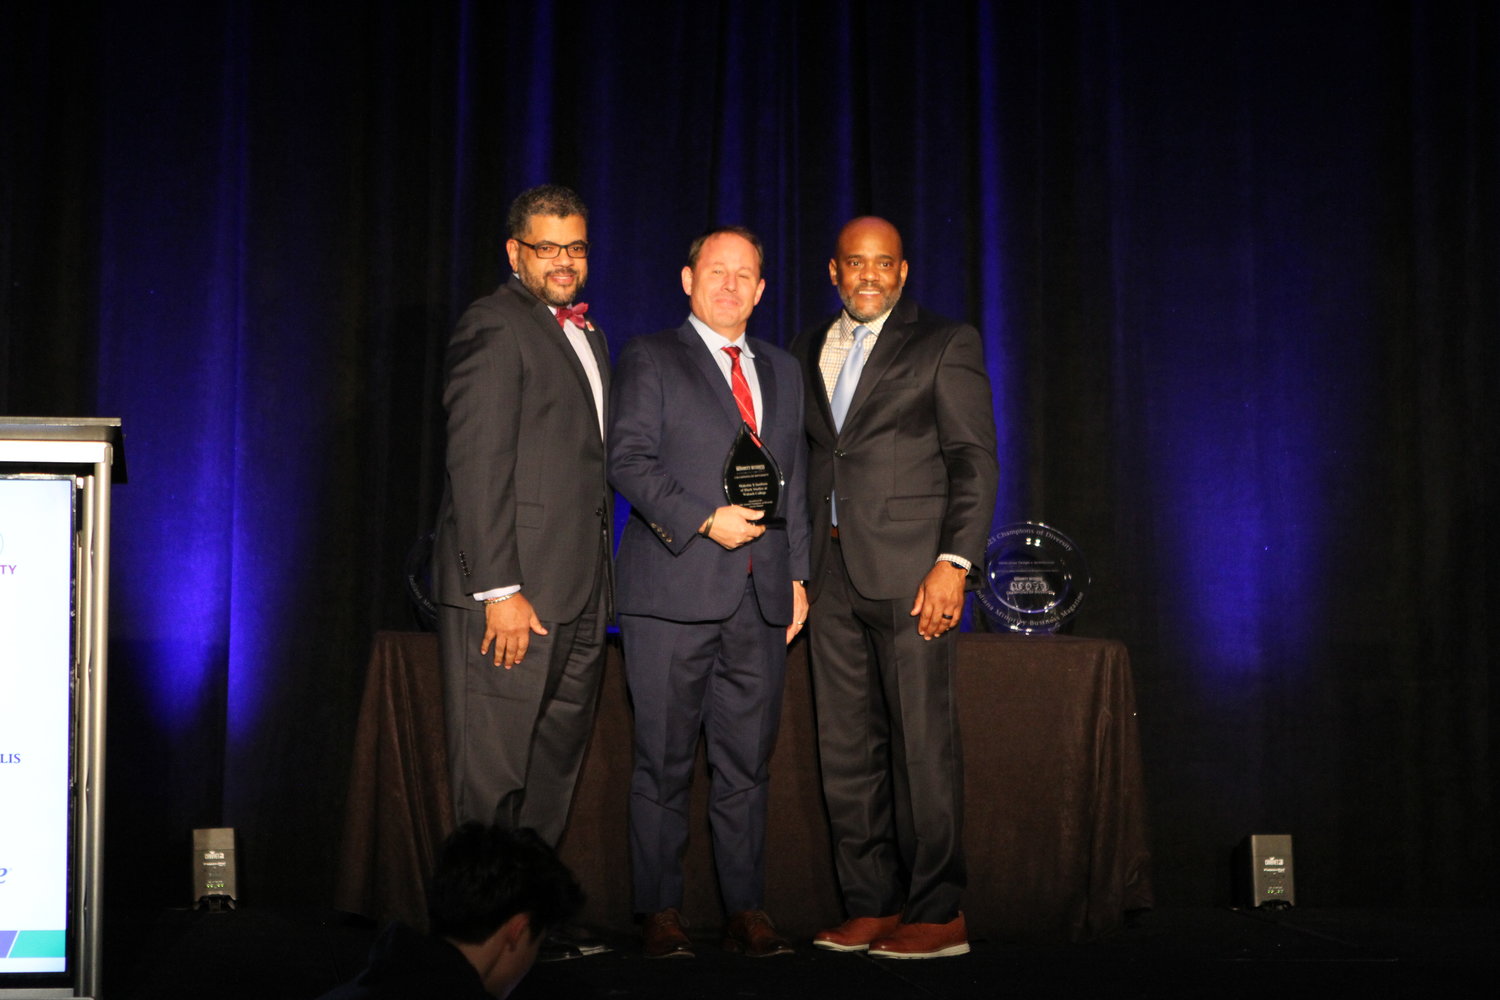 MXIBS Director Steven Jones ’87, left, and Wabash President Scott Feller receive a Champions of Diversity recognition from the Indiana Minority Business Magazine.